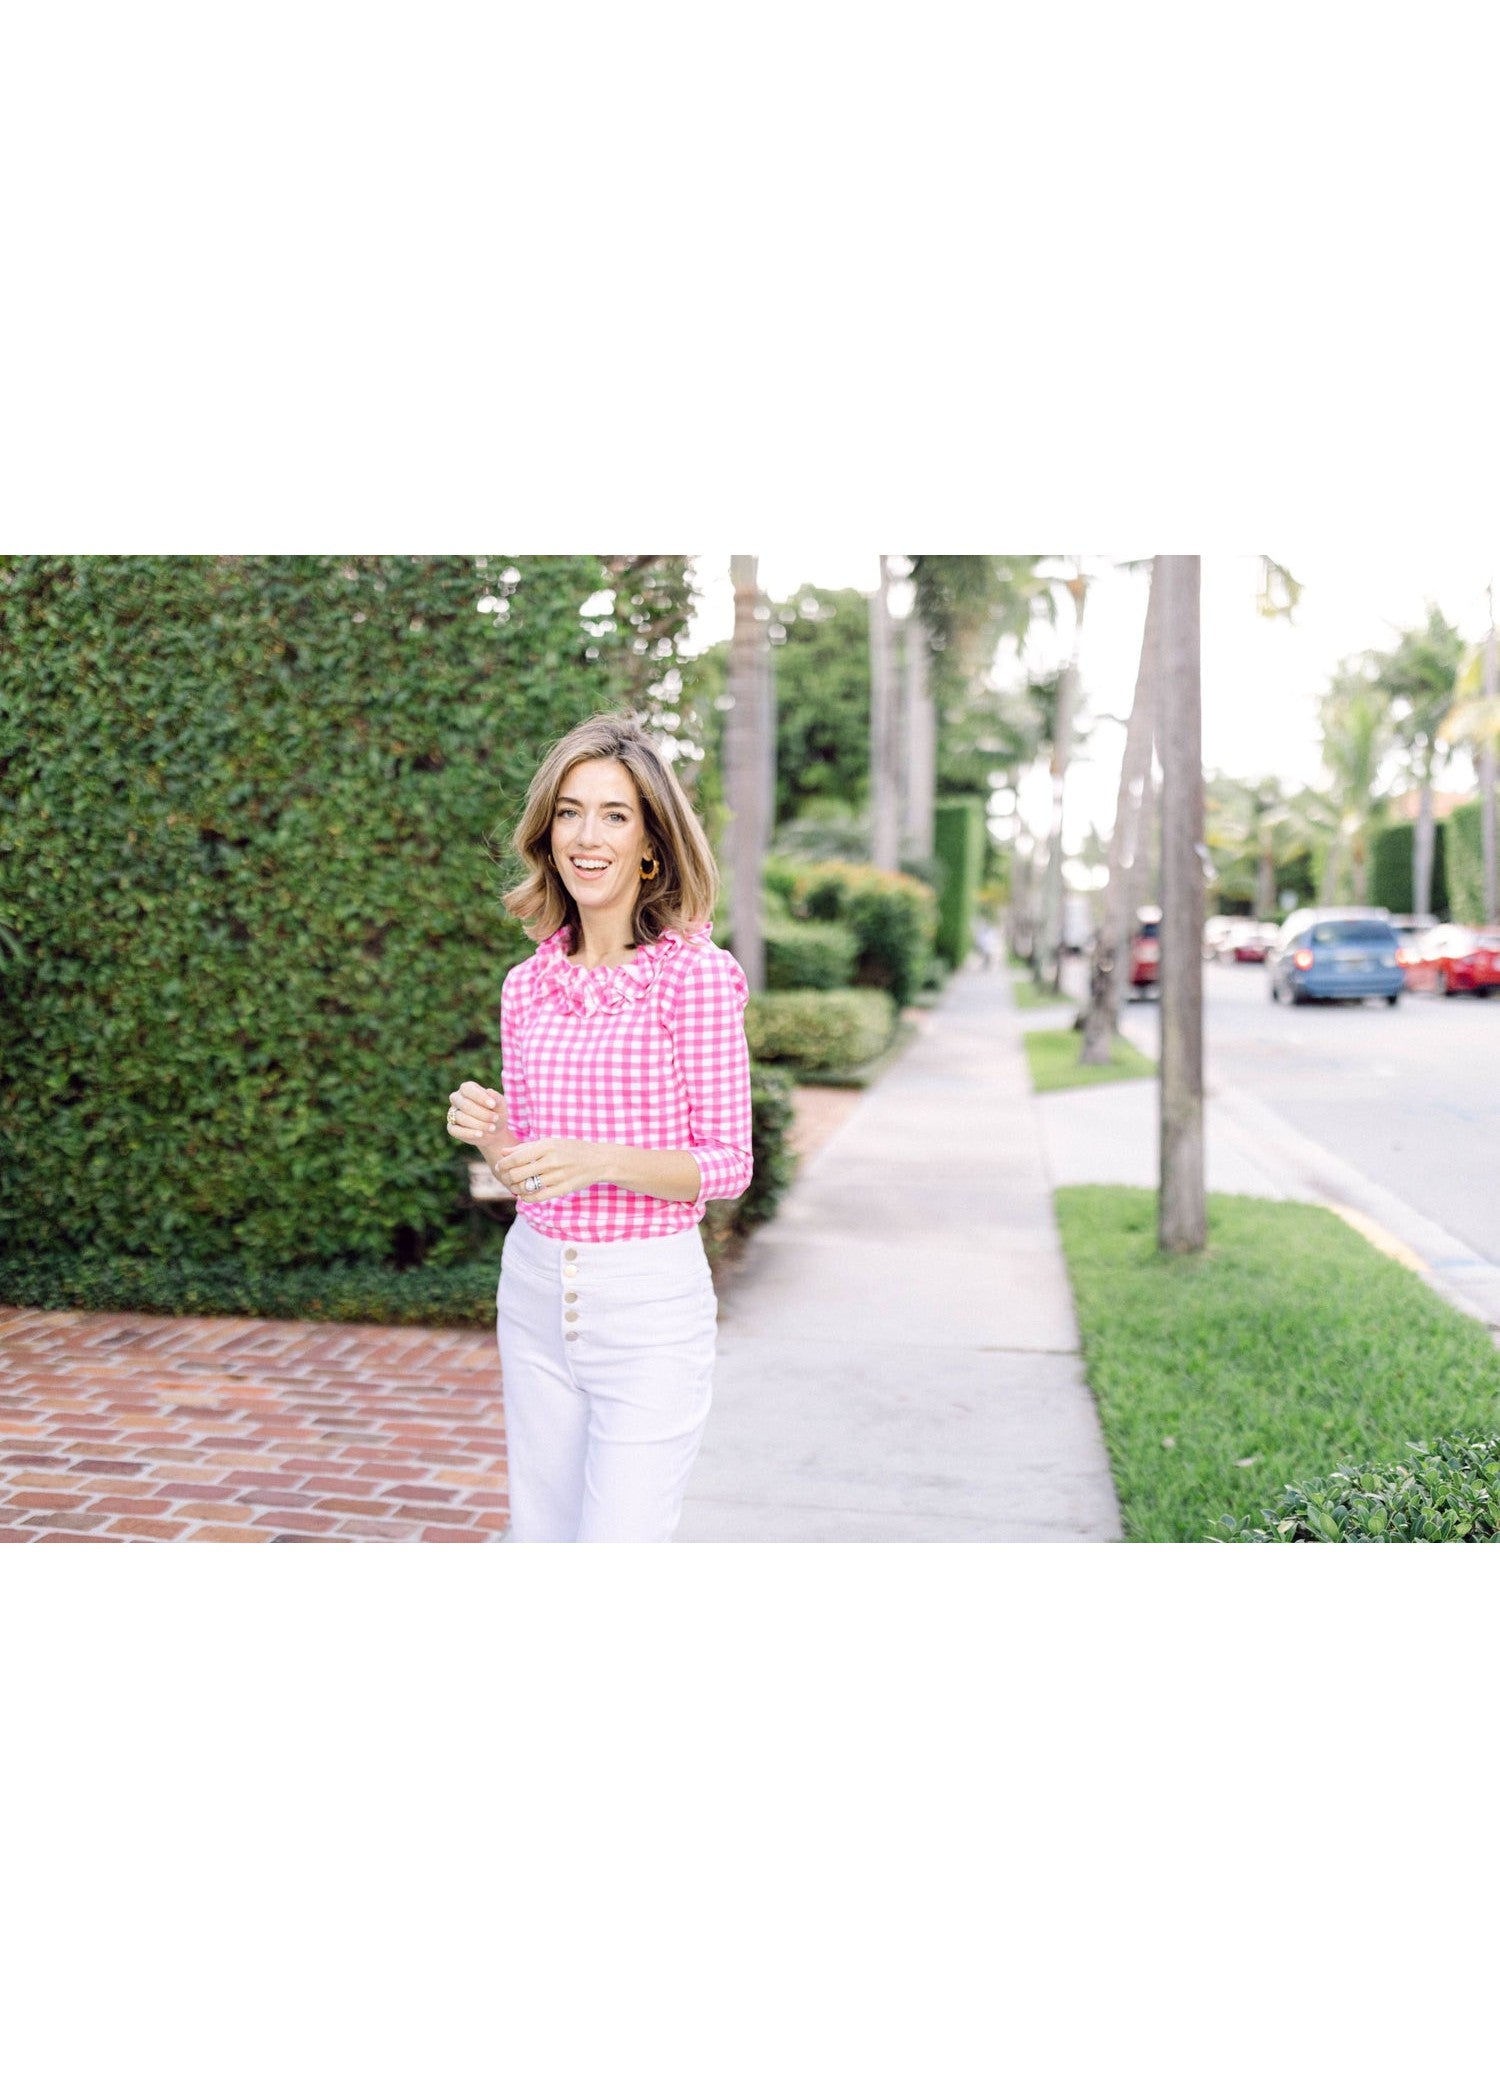 Cricket 3/4 Sleeve Top - Gingham Hot Pink/White